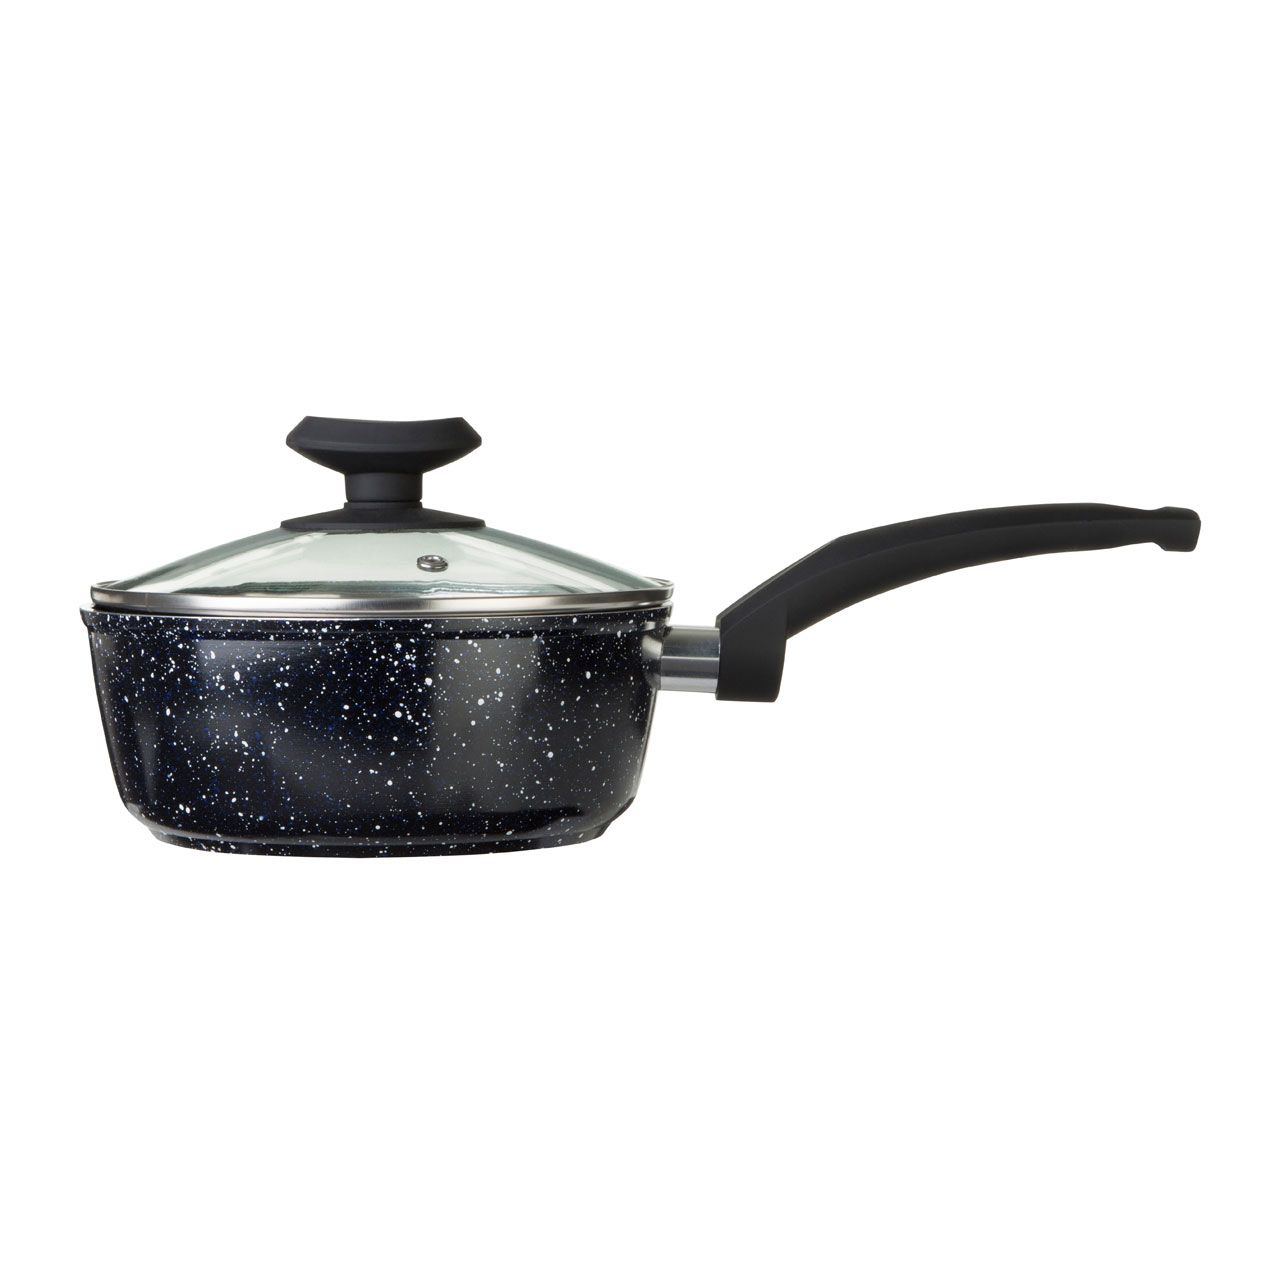 Maison by Premier Stoneflam Forged Aluminium Saucepan with Glass Lid